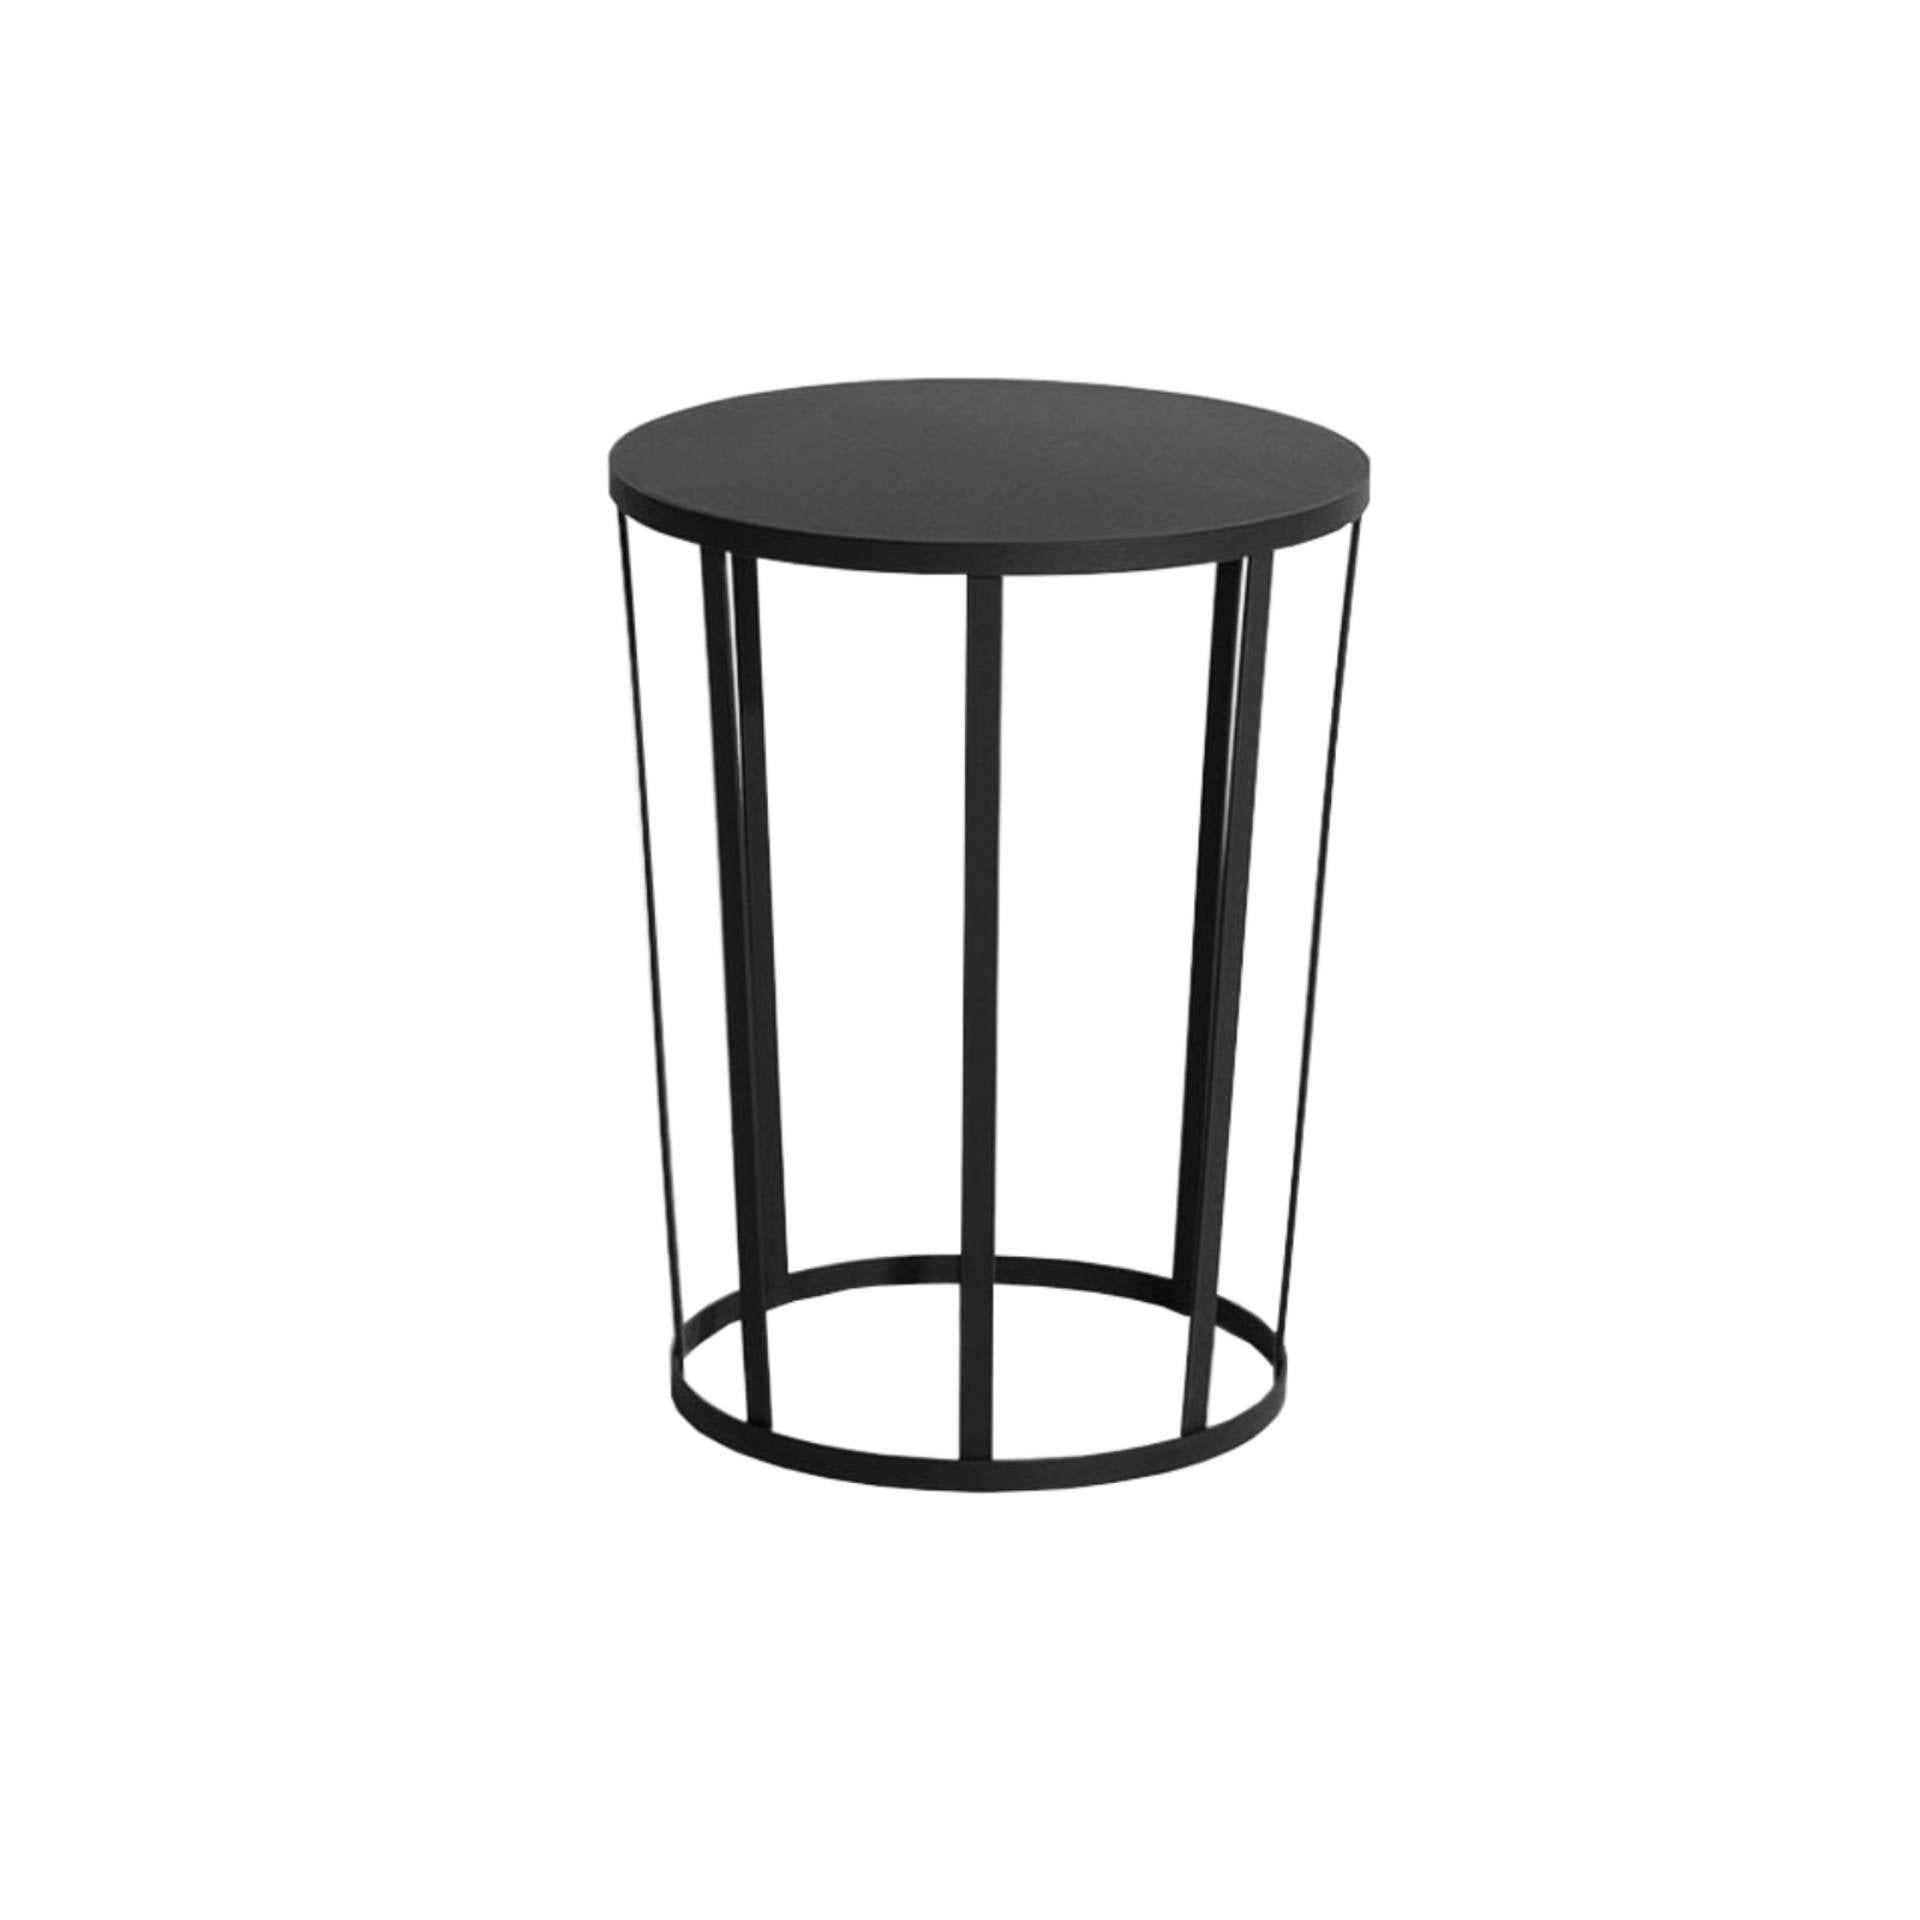 Hollo Side Table/Stool | Buy Petite Friture online at A+R